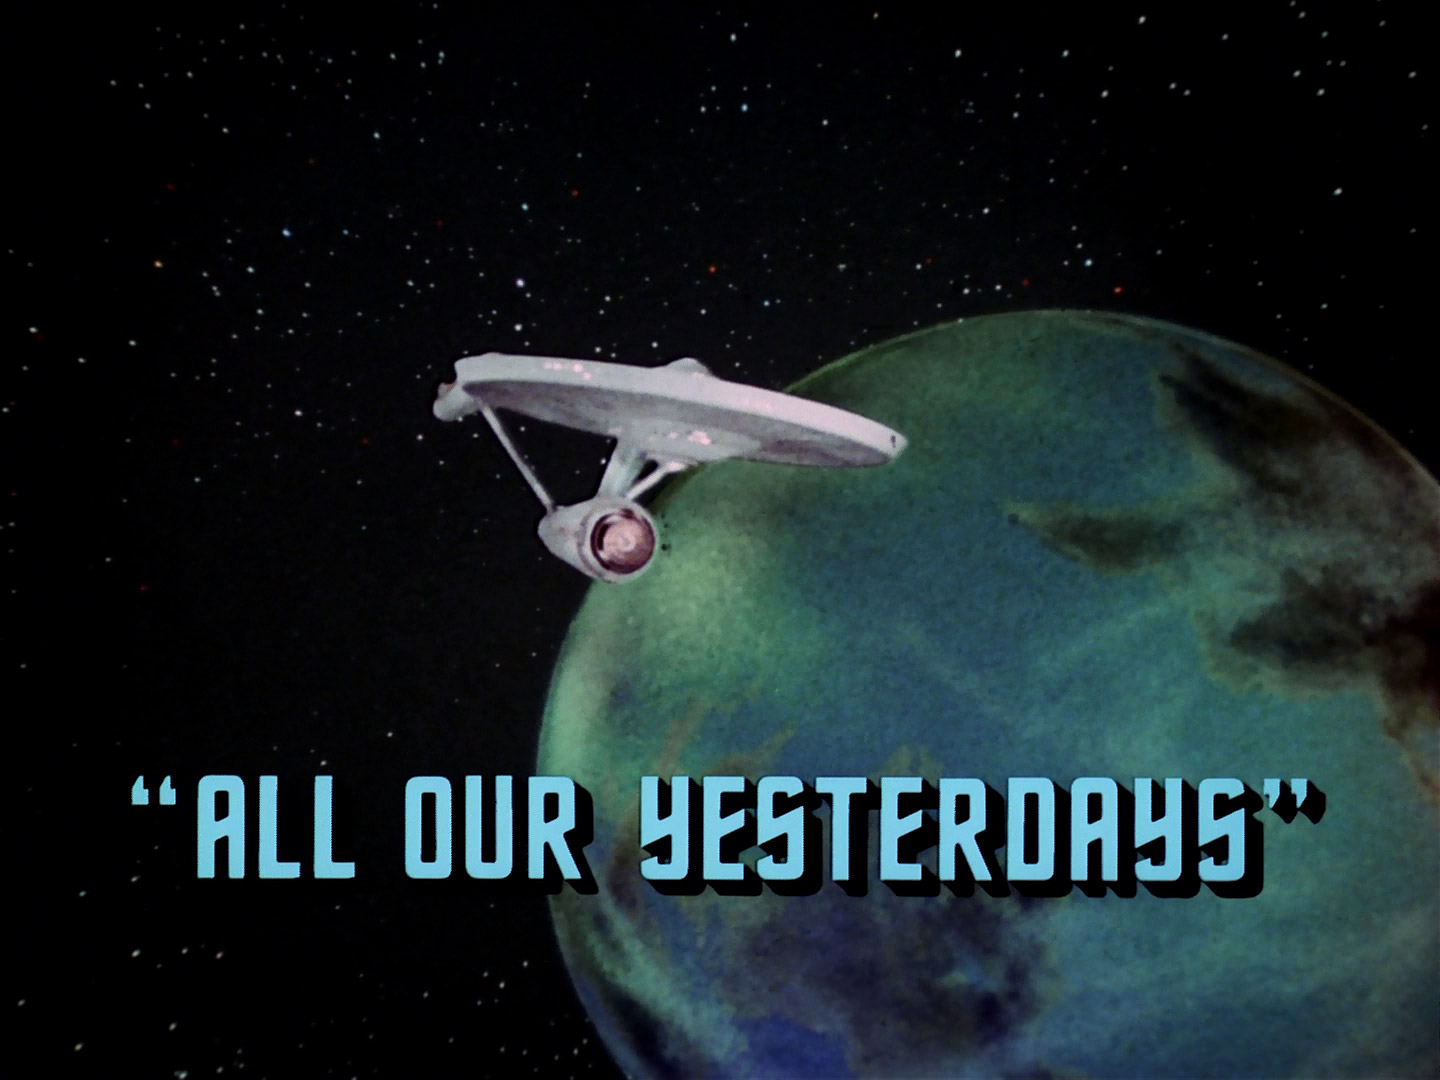 https://tos.trekcore.com/gallery/albums/screencaps/season3/323-all-our-yesterdays/all-our-yesterdays-br-050.jpg